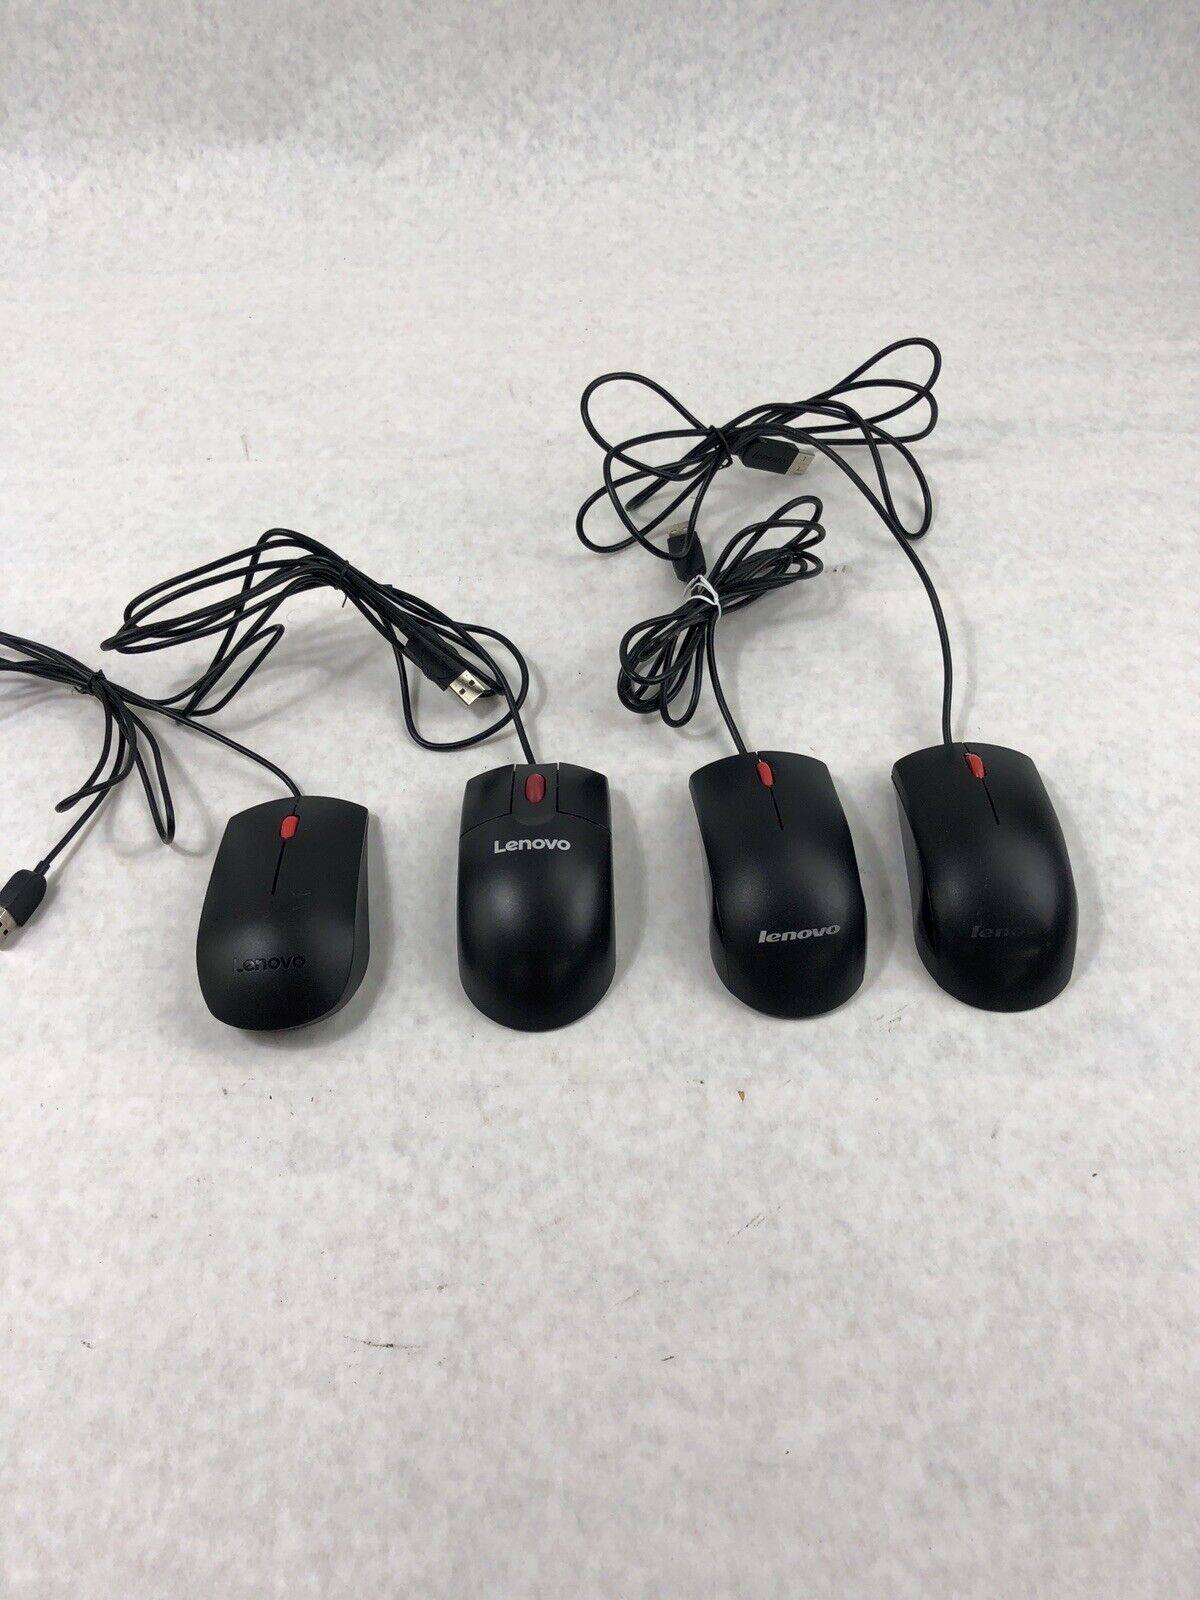 Lot of 4 Assorted Lenovo Wired USB Mice - 2 45J4889 - 1 0PH133 - 1 03X6861